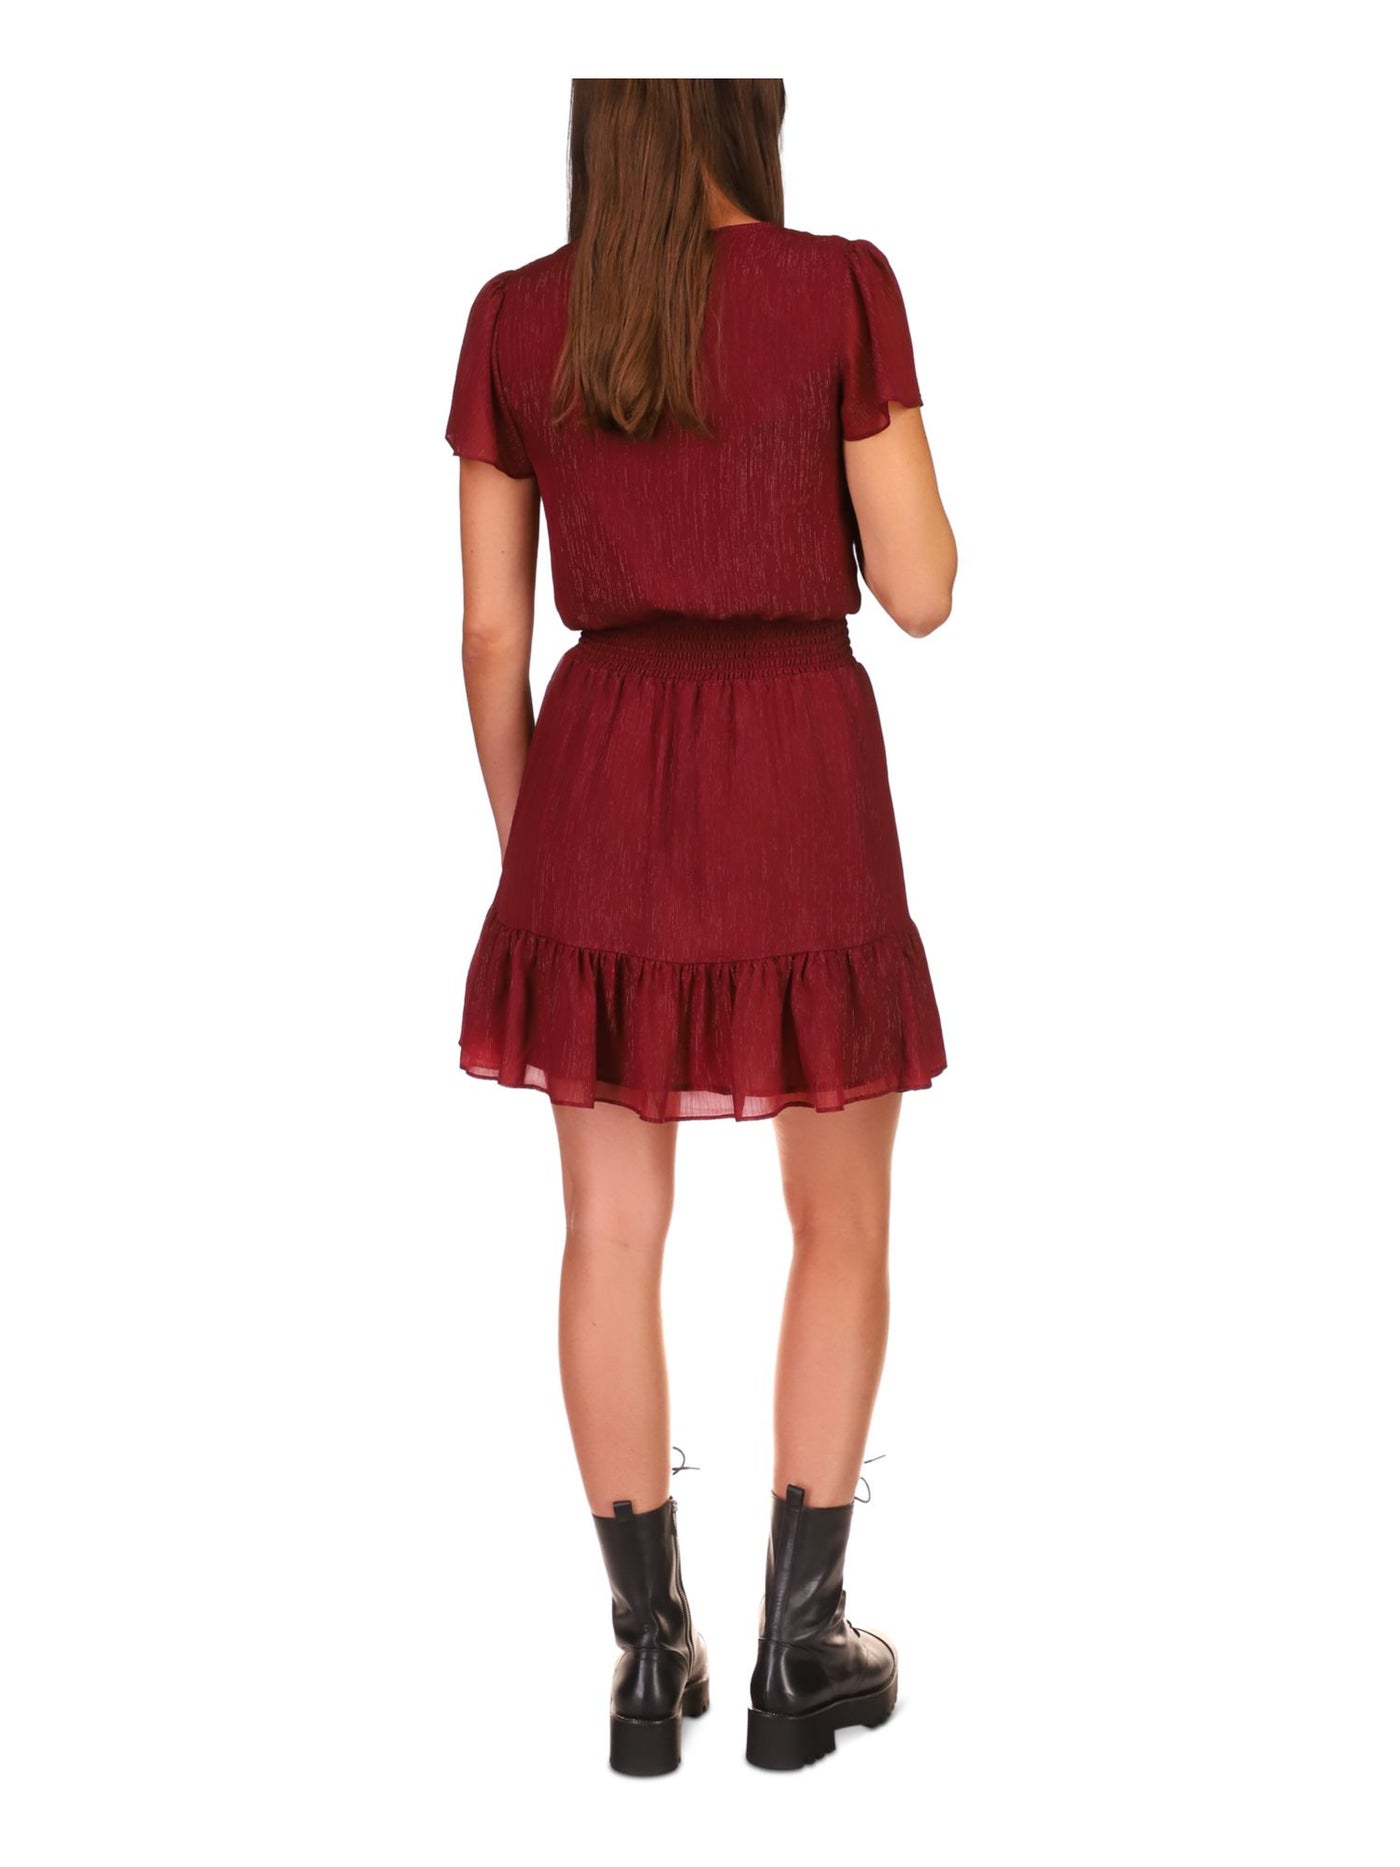 MICHAEL MICHAEL KORS Womens Burgundy Smocked Sheer Lined Ruffled Hook And Eye Front Short Sleeve Surplice Neckline Above The Knee A-Line Dress L